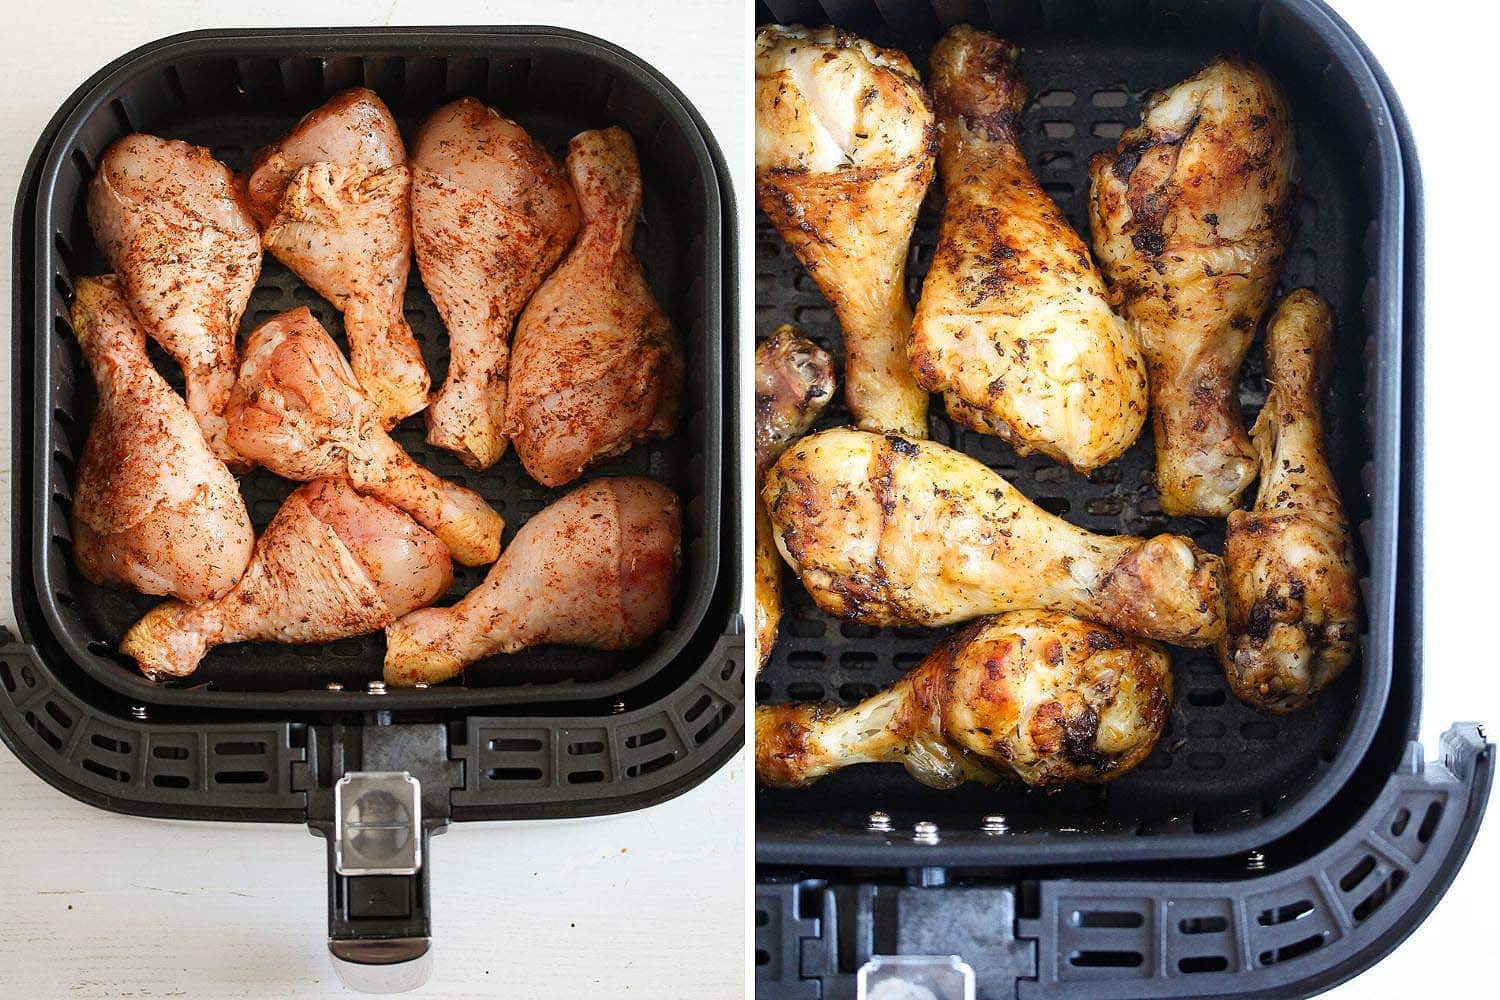 chicken legs in the basket of an air fryer before and after cooking